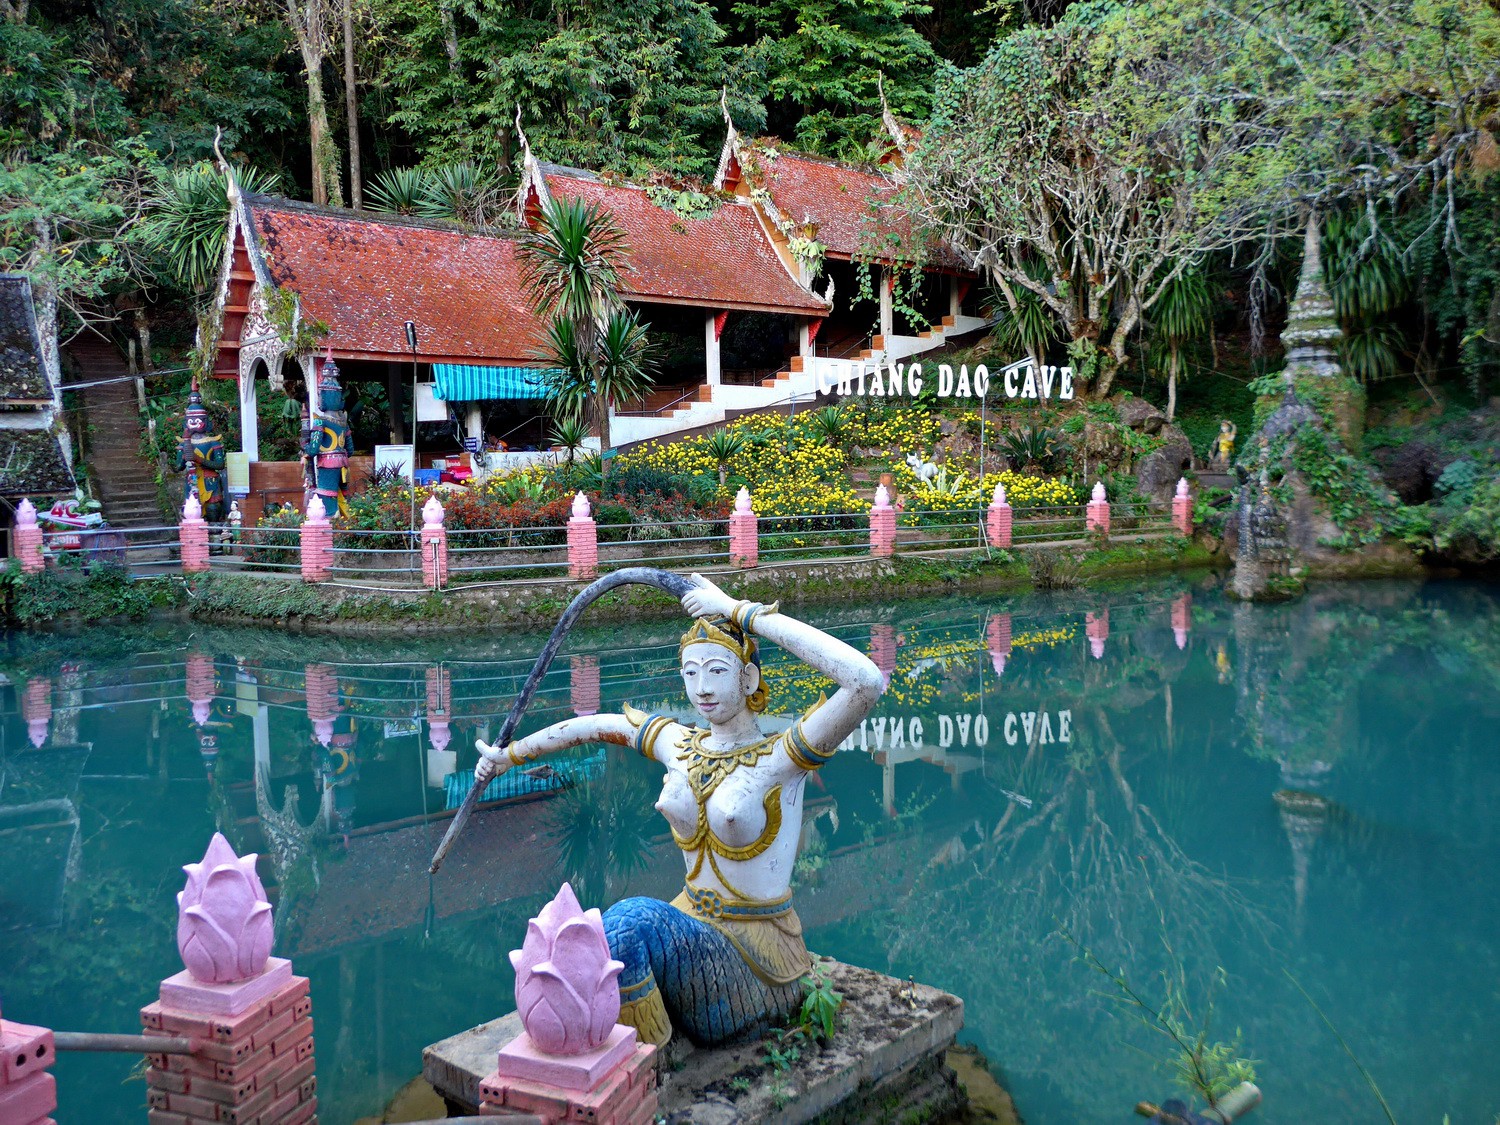 Mermaid in front of Chiang Dao Cave